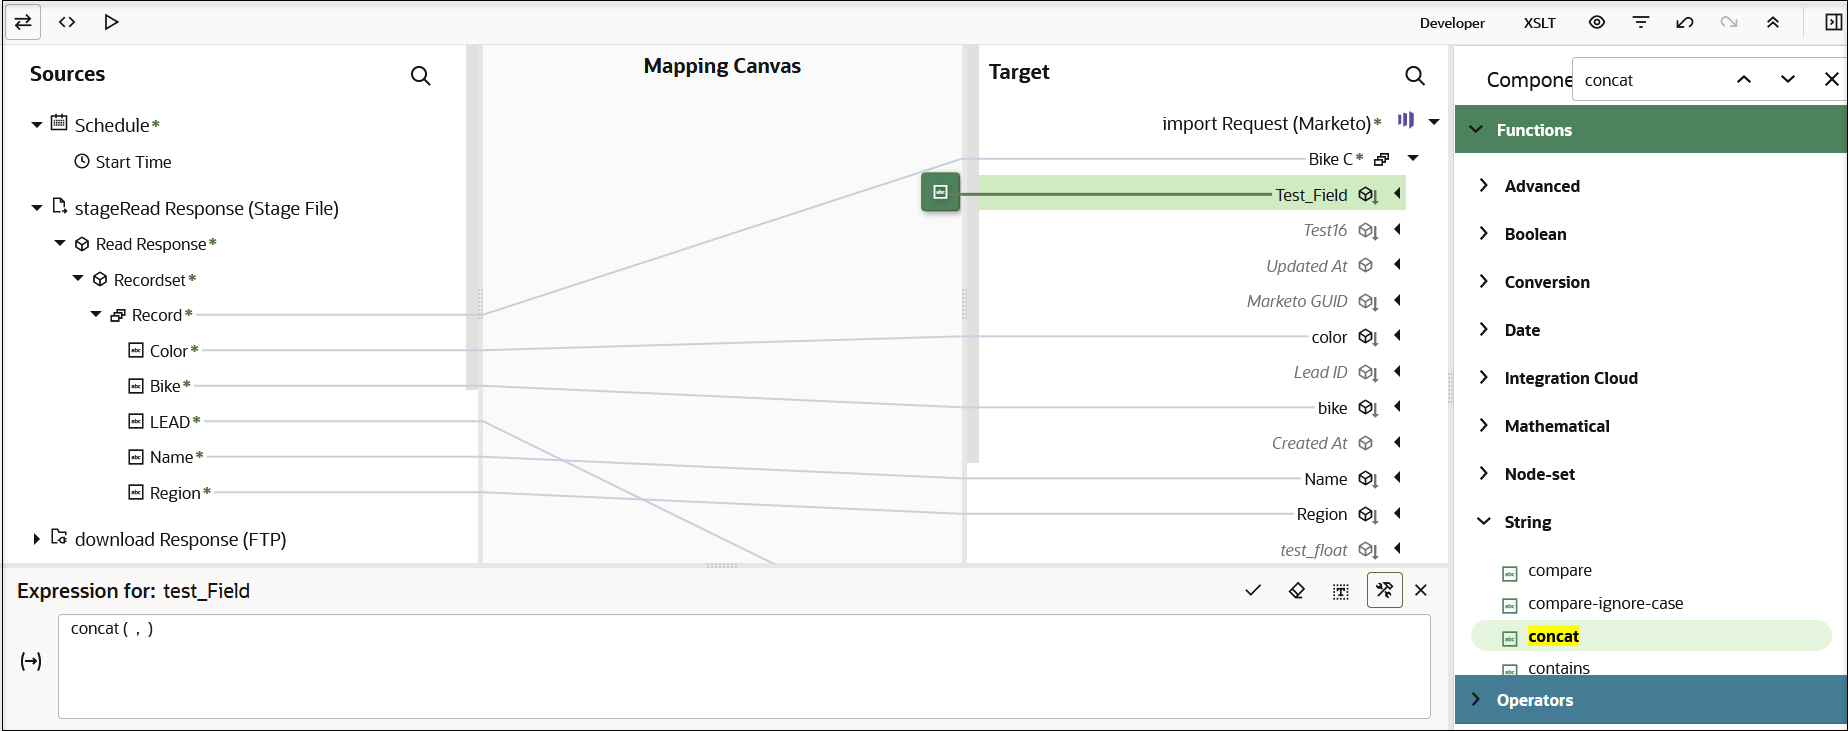 Three icons appear in the upper left. Below this is the Sources tree, the Mapping Canvas section, and the Target tree. Below this is the Expression Builder field, with five icons to the right. To the right of the Target tree is the Component section. Functions has been selected. Under String, concat is selected. In the upper right of the page are the Developer button, XSLT button, and six icons.